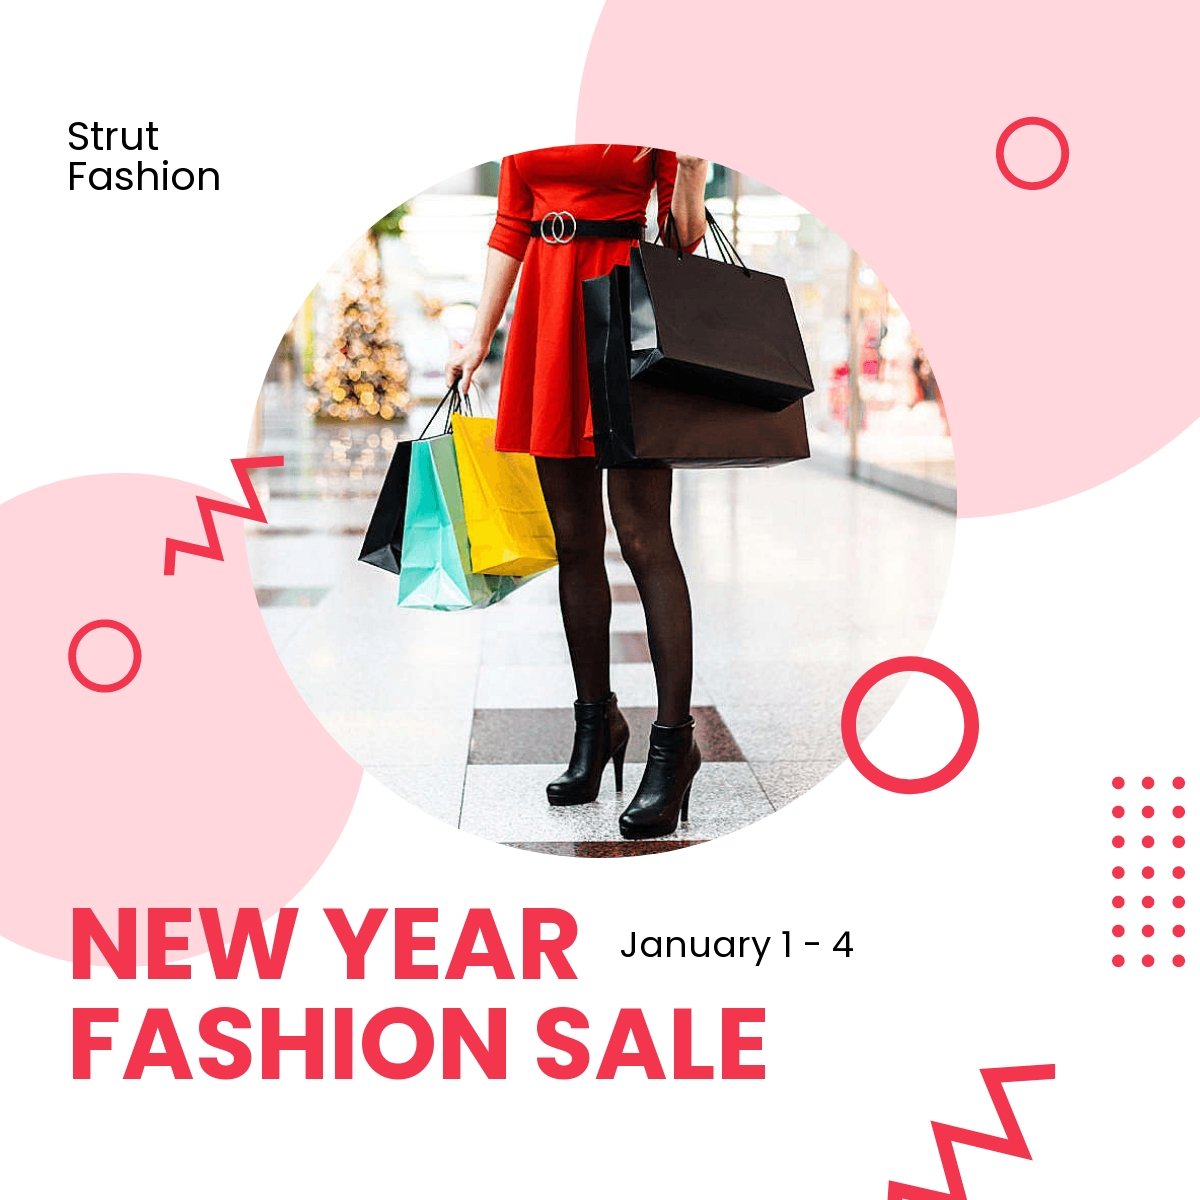 New Year Fashion Sale Promotion Linkedin Post Template